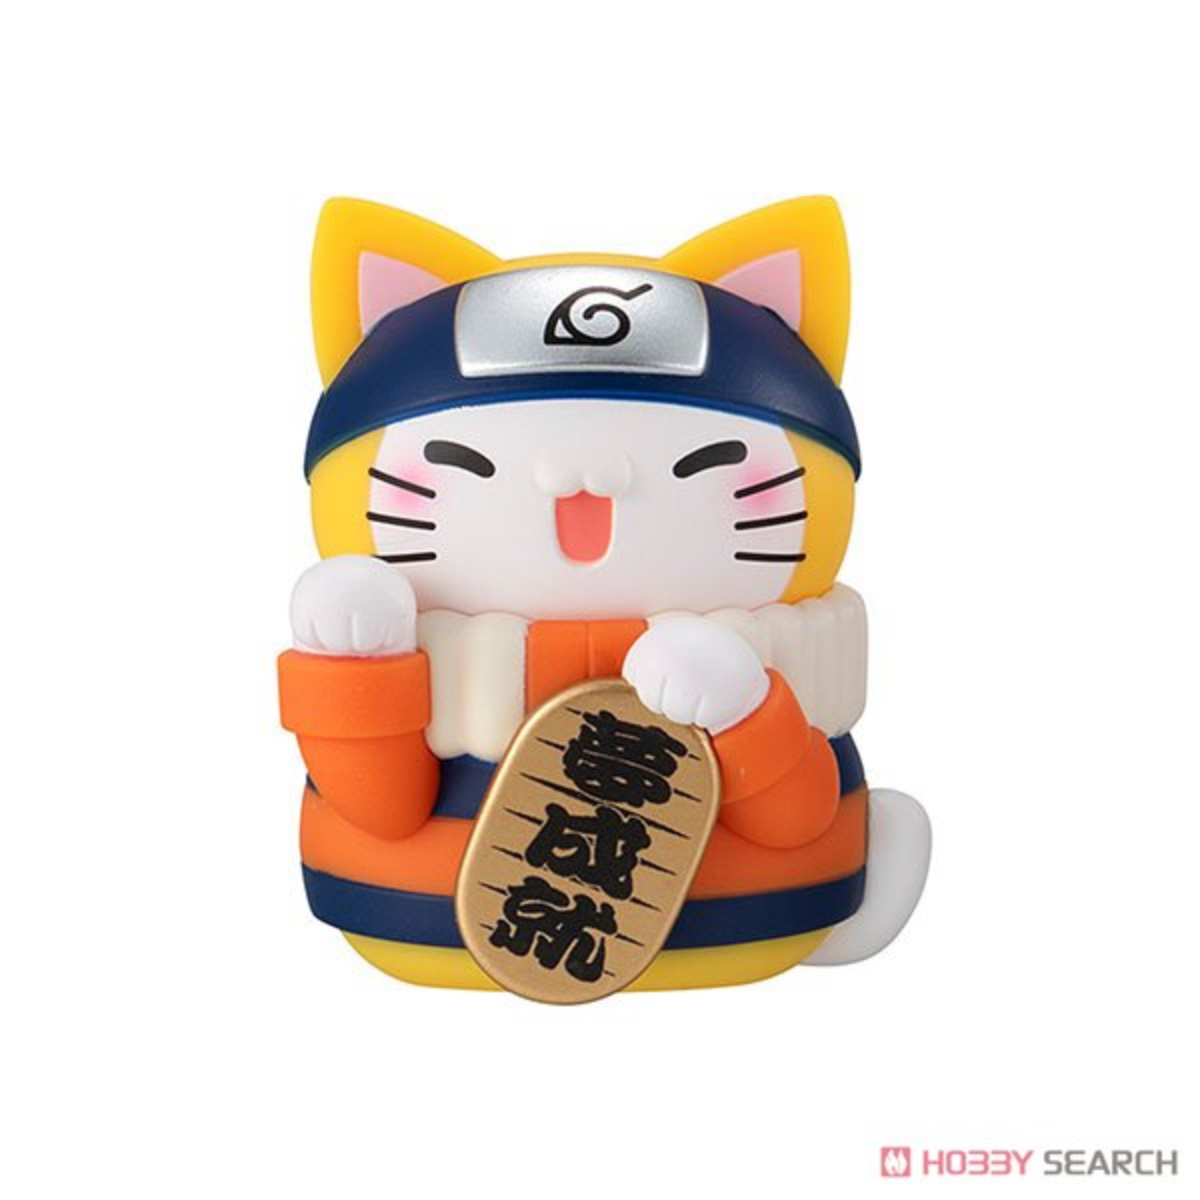 MEGA CAT PROJECT NARUTO Shippuden Nyaruto! Beckoning cat FORTUNE One more time!-Display Box (6pcs)-MegaHouse-Ace Cards & Collectibles